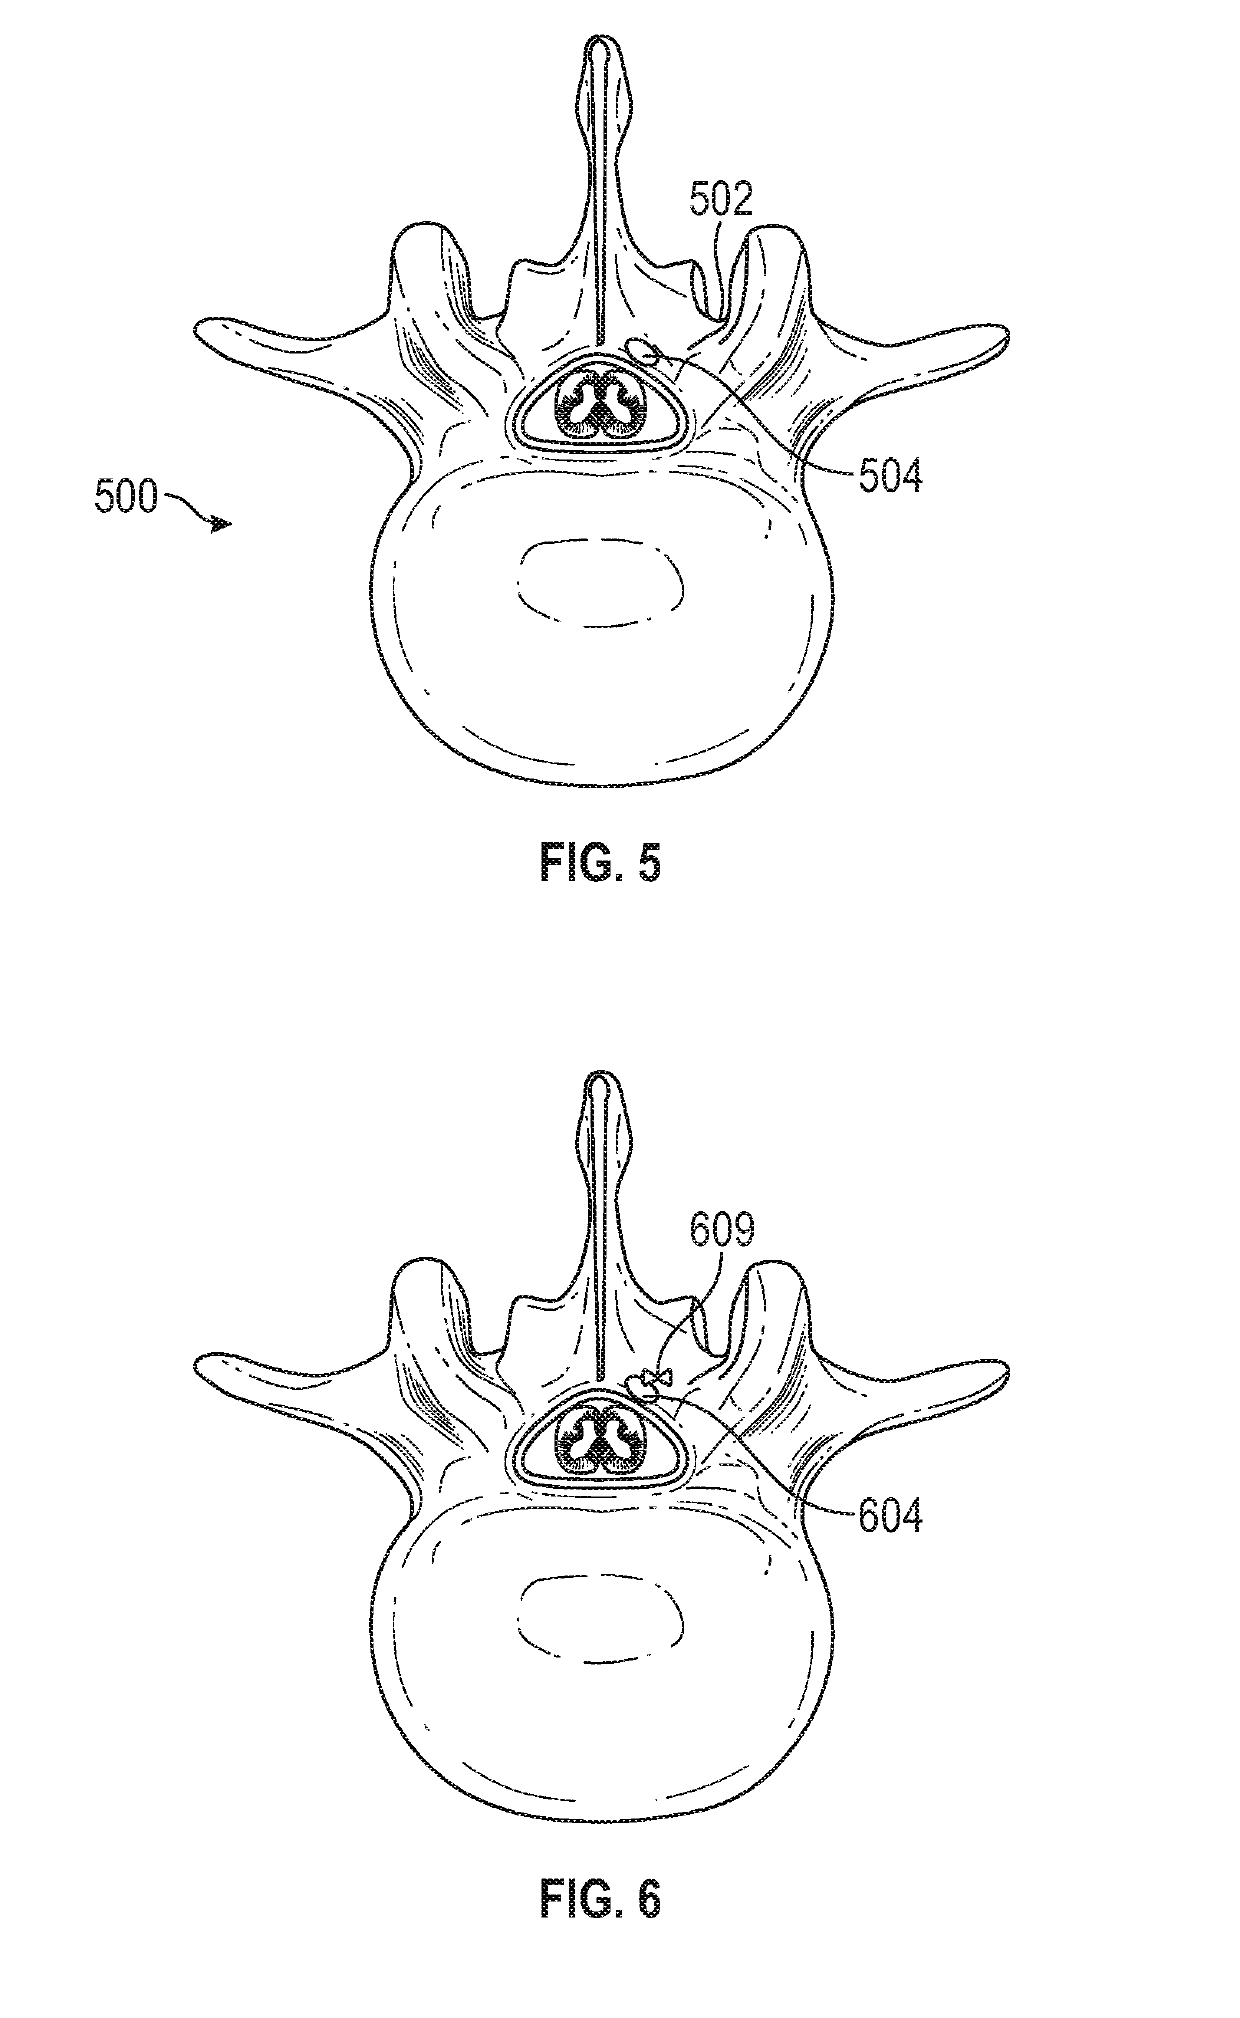 Shape Memory Surgical Sponge For Retracting The Dura During A Laminectomy Procedure